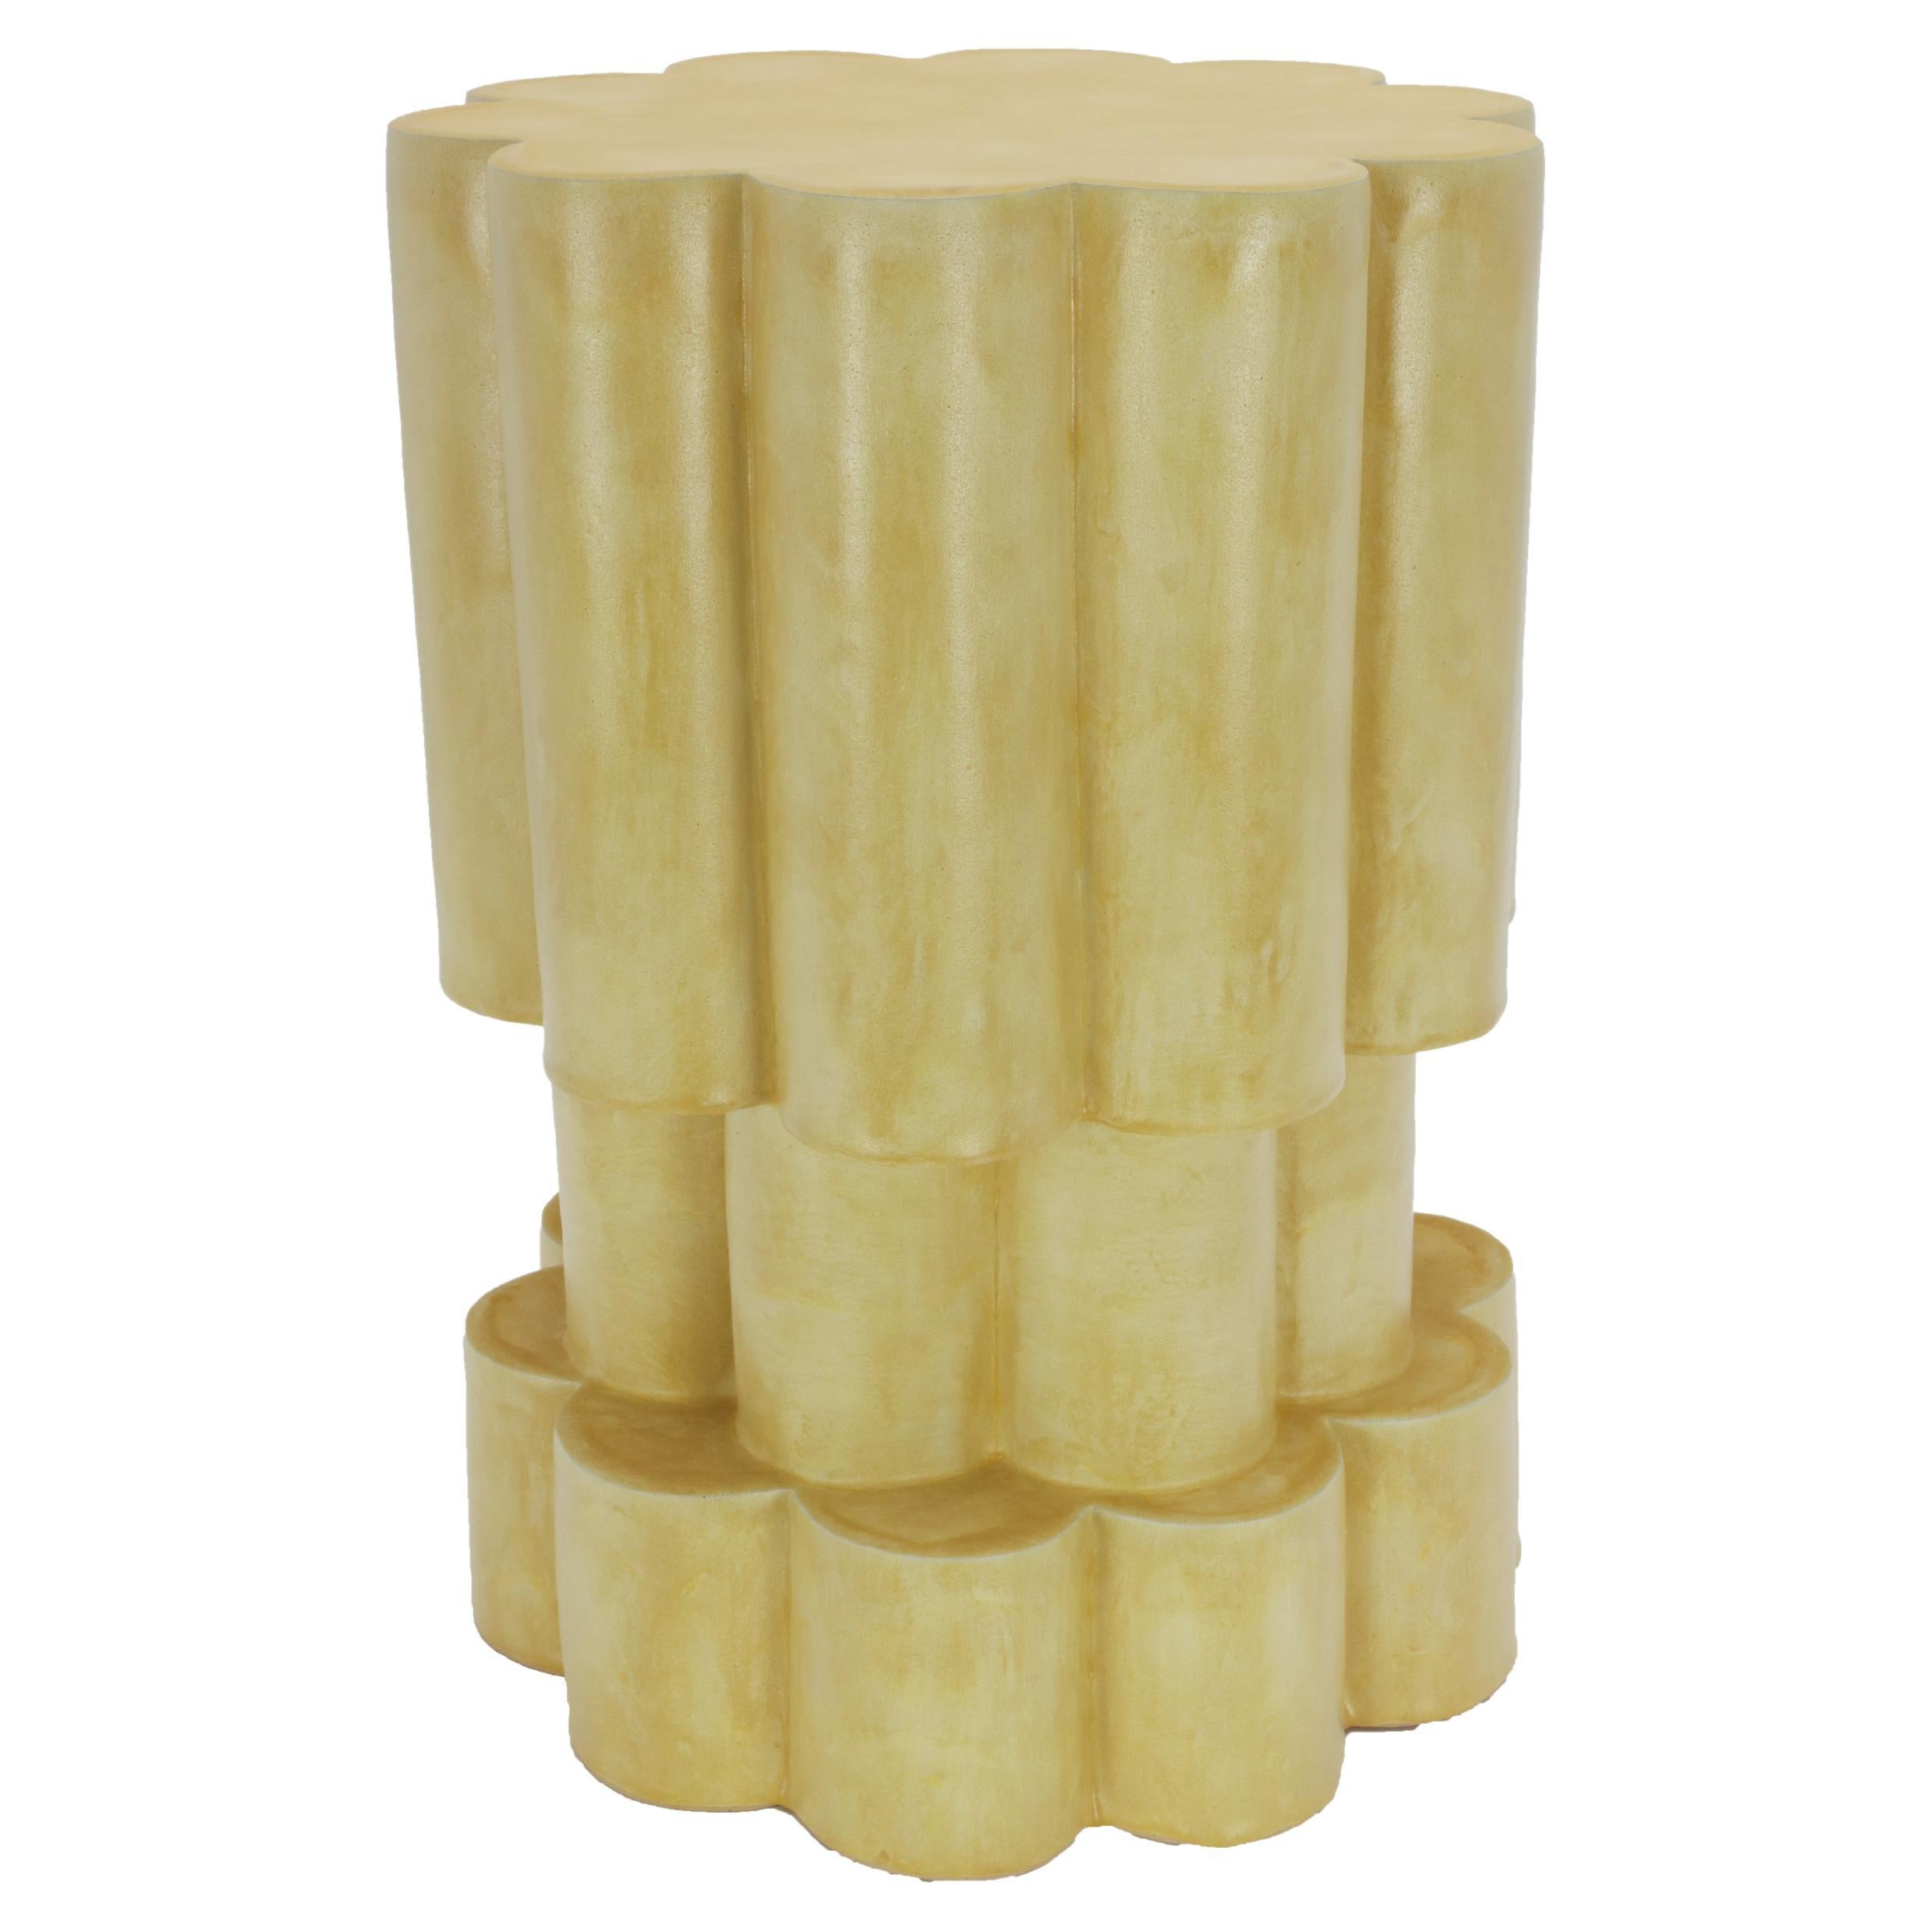 Three-Tier Ceramic Cloud Side Table & Stool in Buttery Yellow by BZIPPY